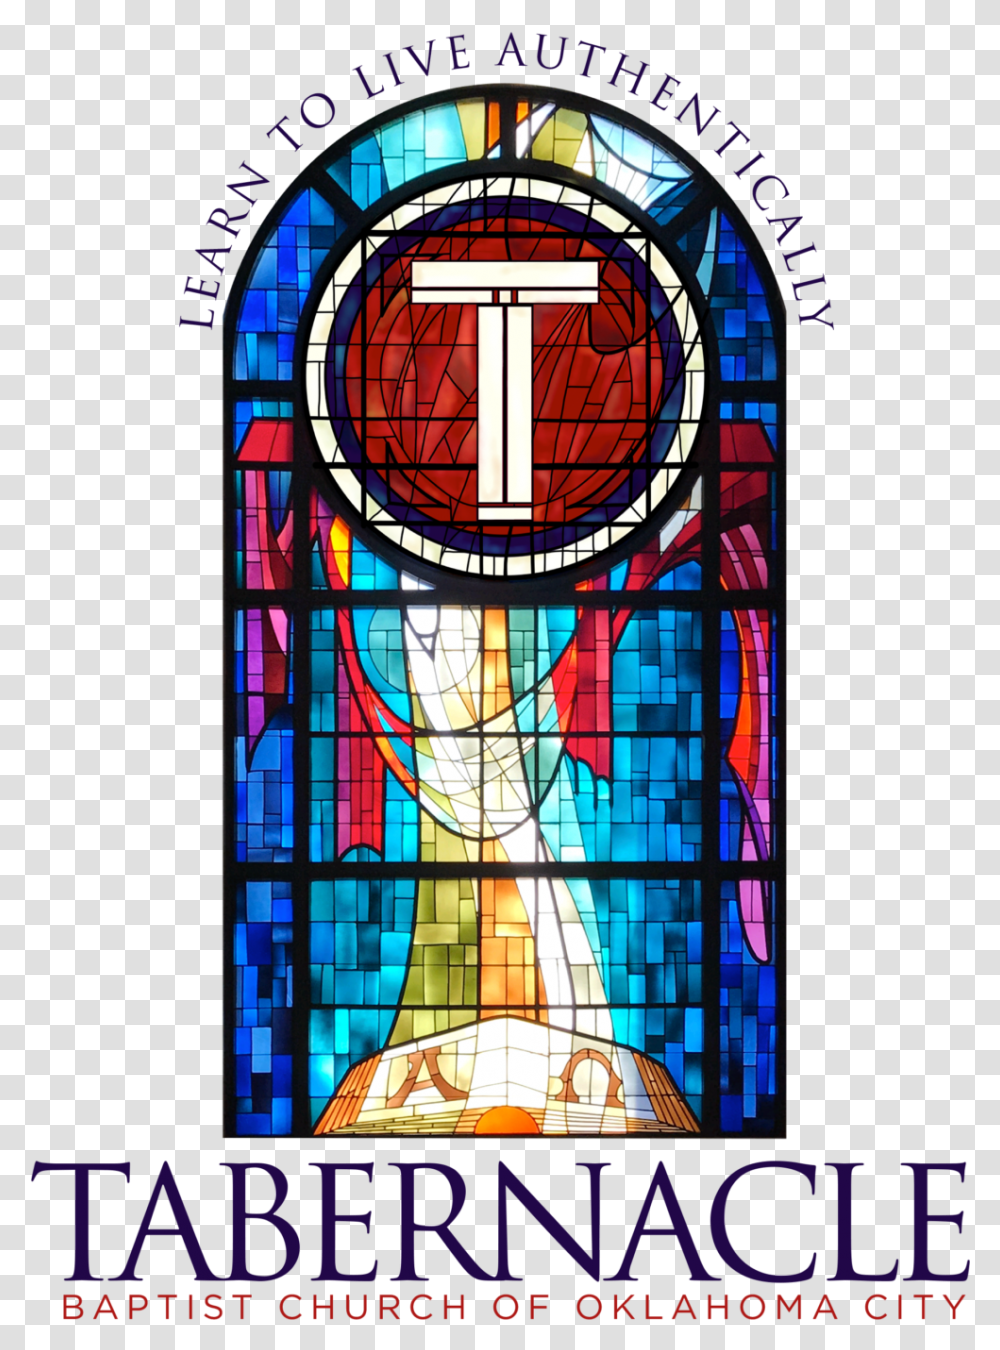 Tabernacle Baptist Church Of Oklahoma City Clipart Tabernacle Baptist Church, Poster, Advertisement, Clock Tower, Architecture Transparent Png